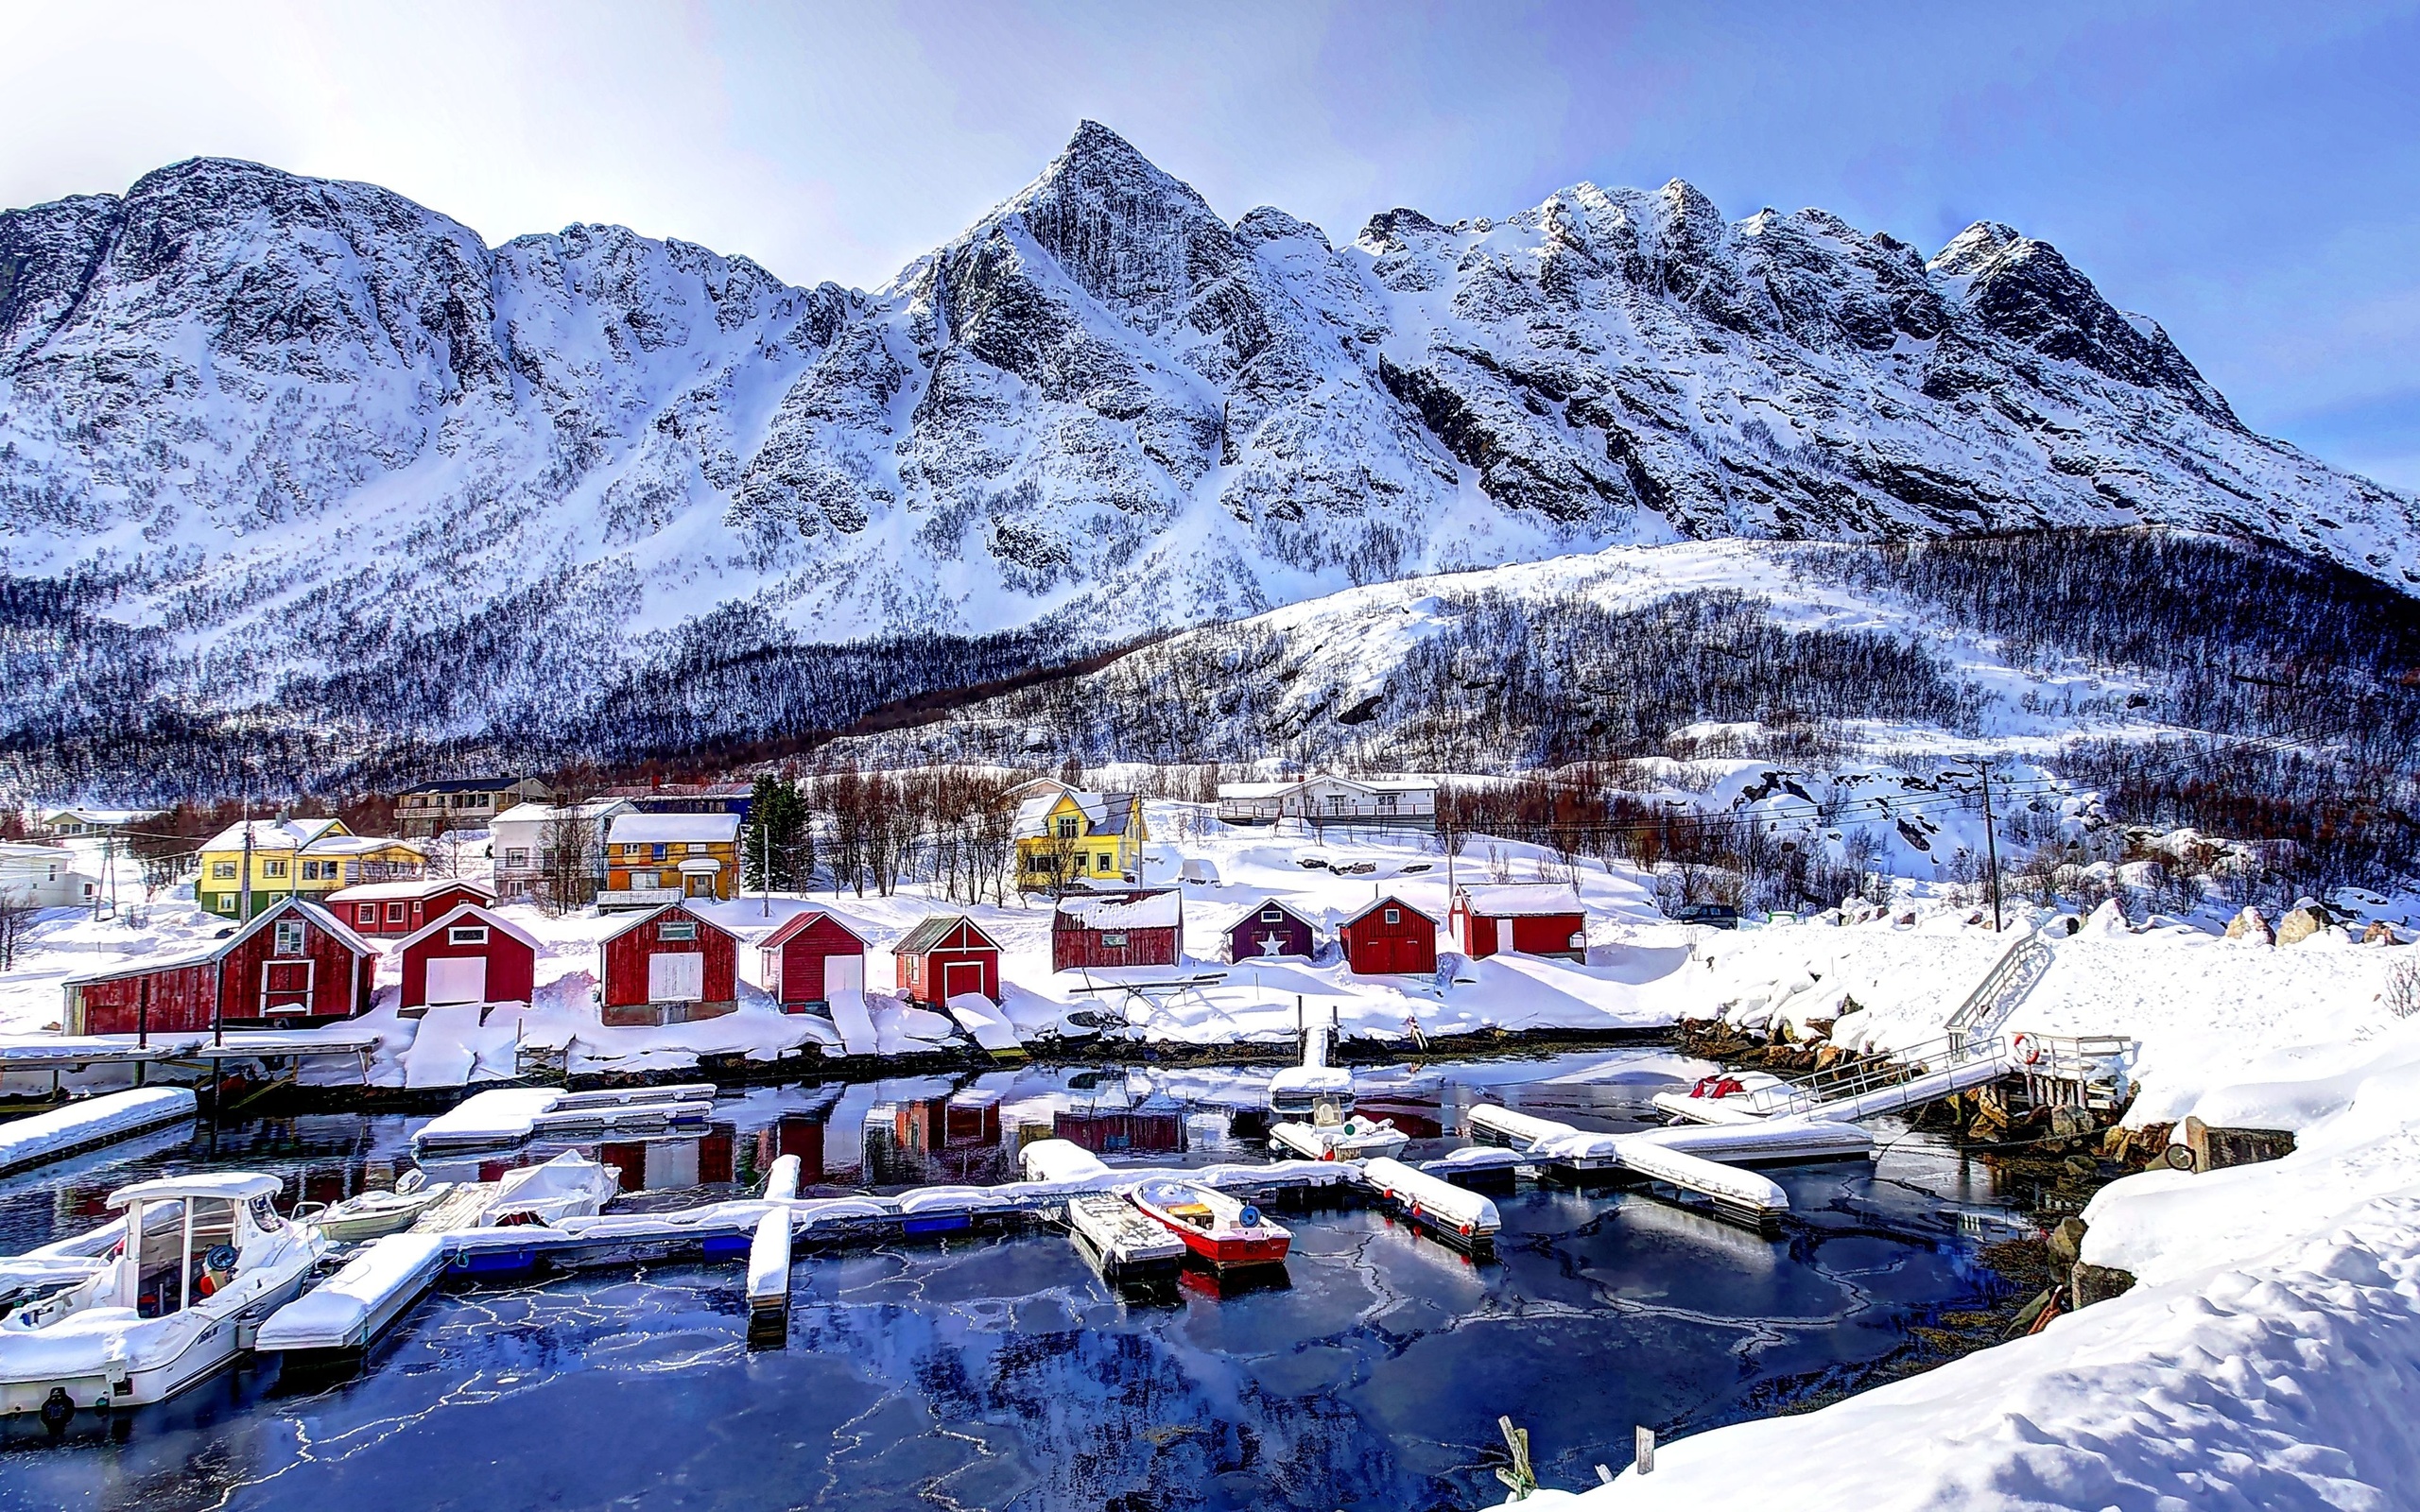 norway, Mountains, Houses, Winter, Snow, Marina, Landscape Wallpaper